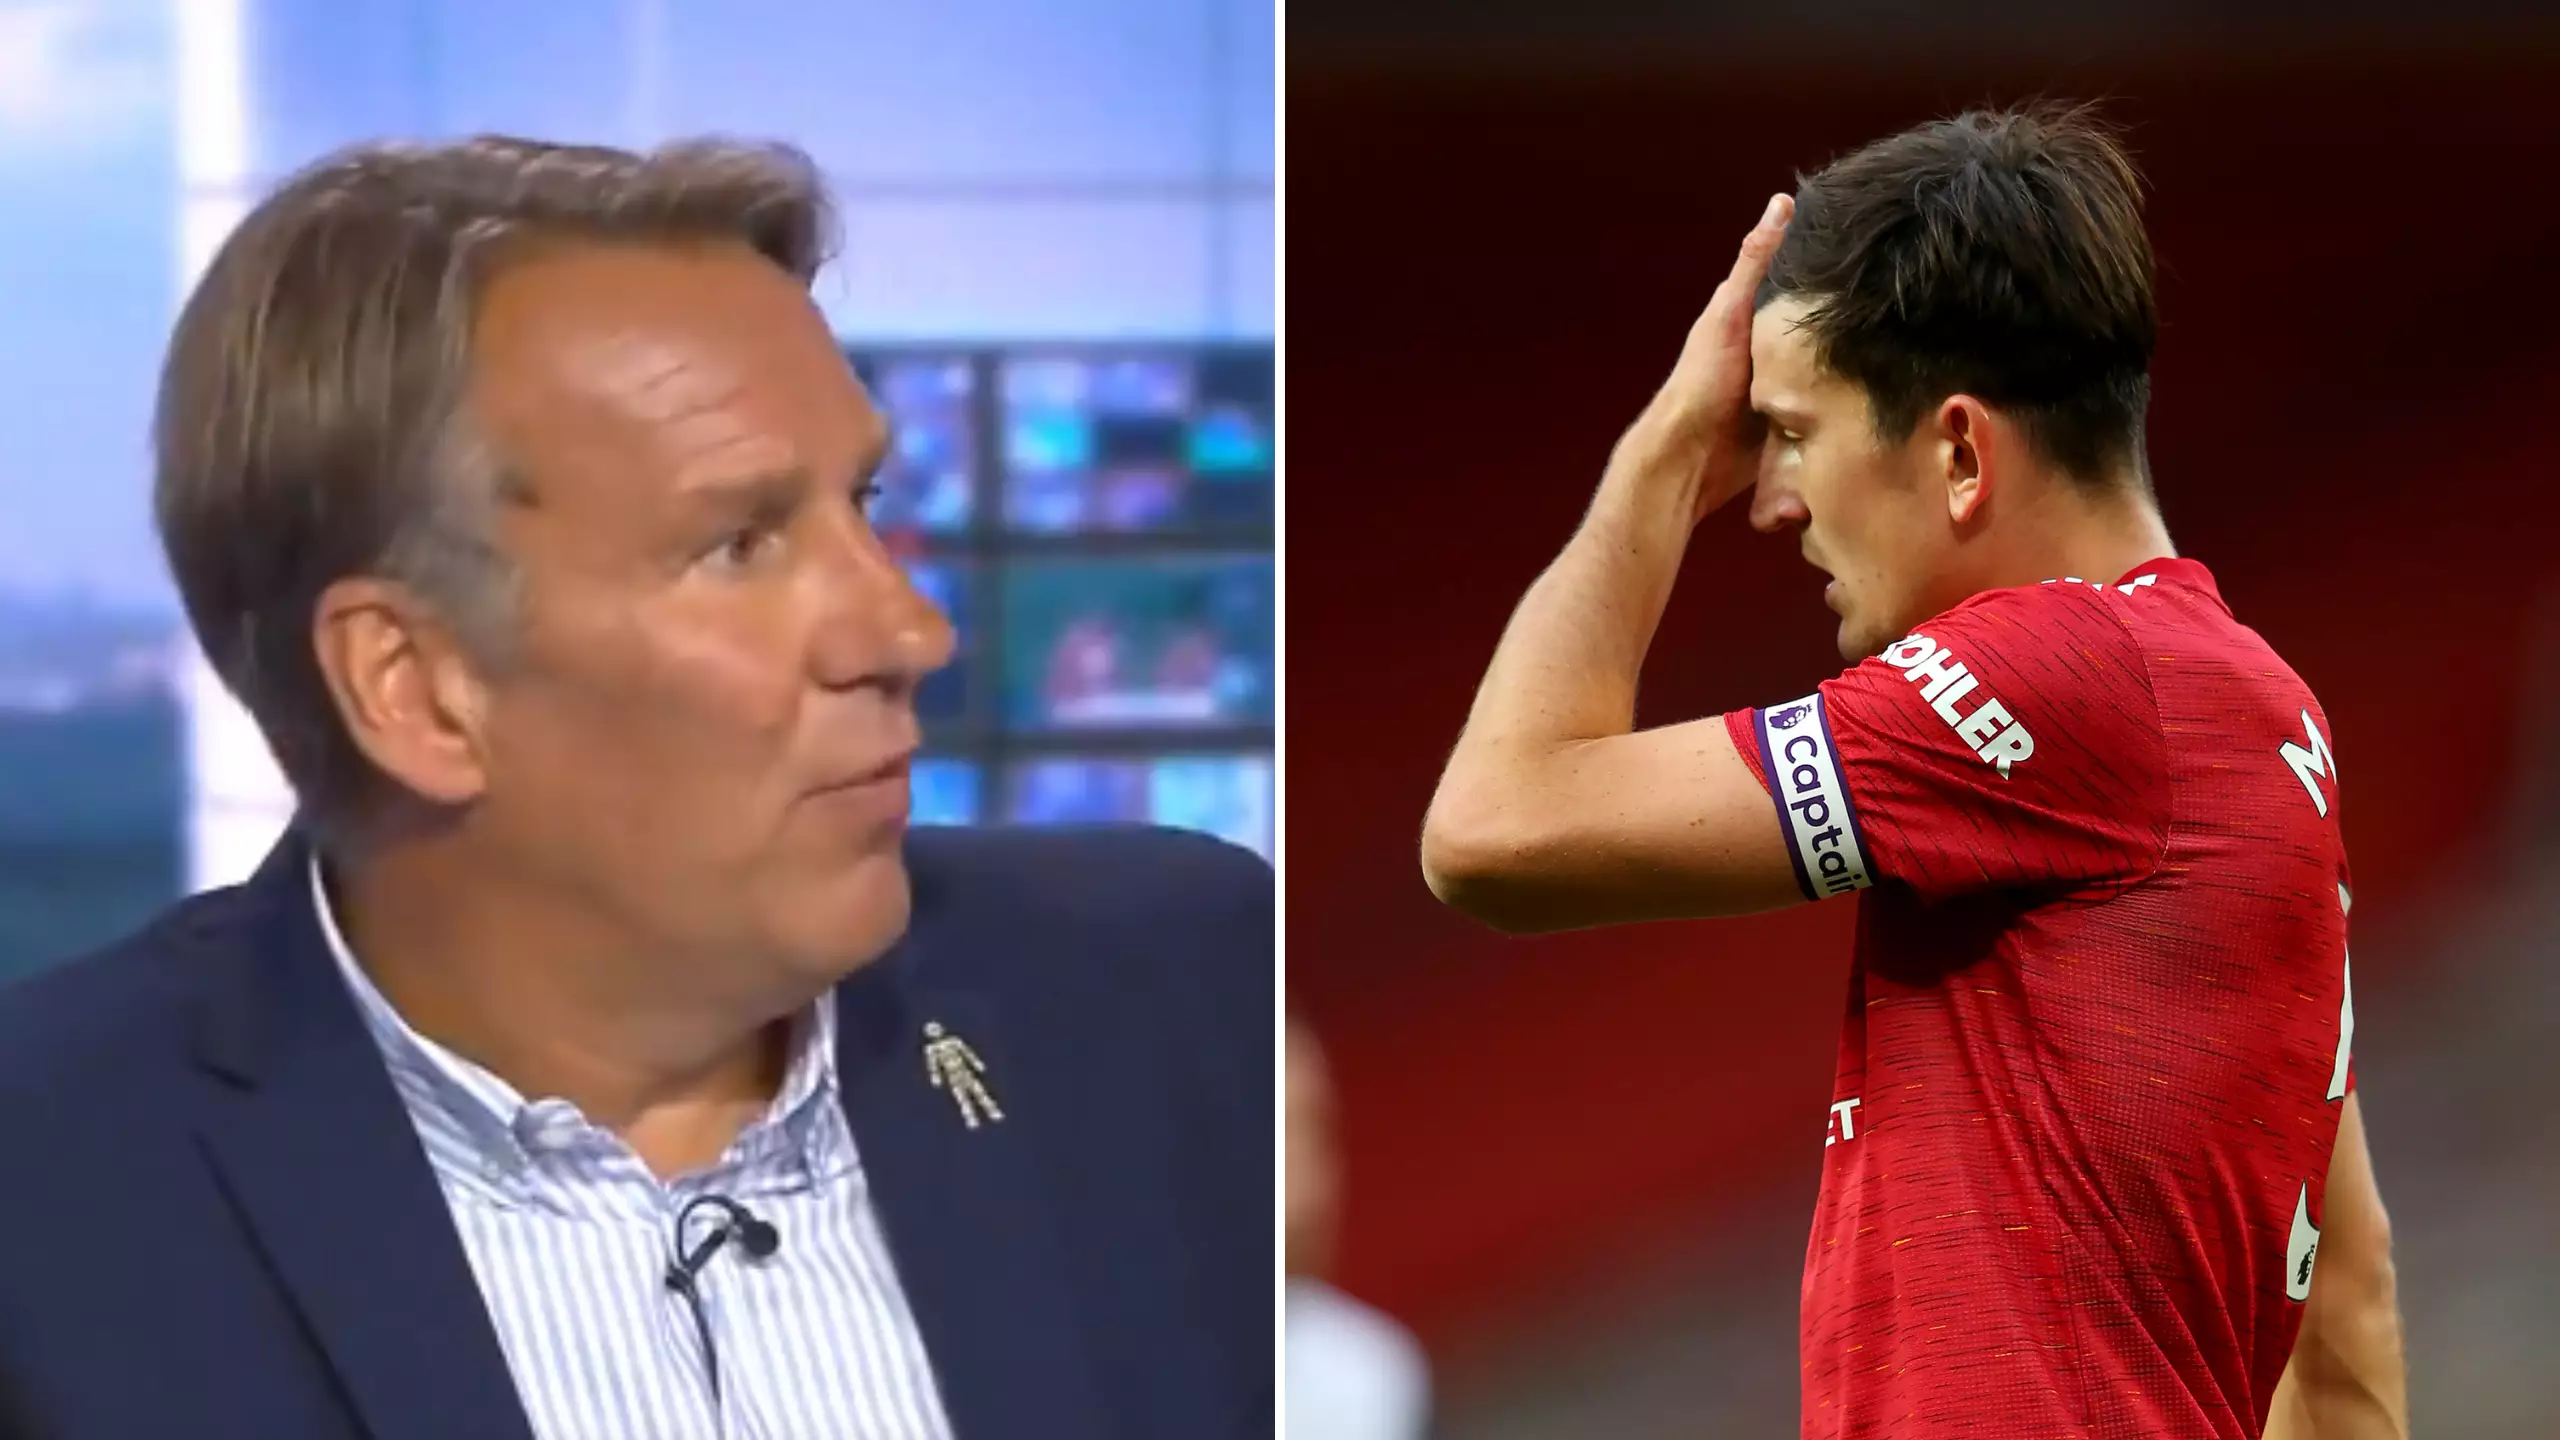 Paul Merson's Comments About Harry Maguire From Last Season Re-Emerge And They Are Spot On